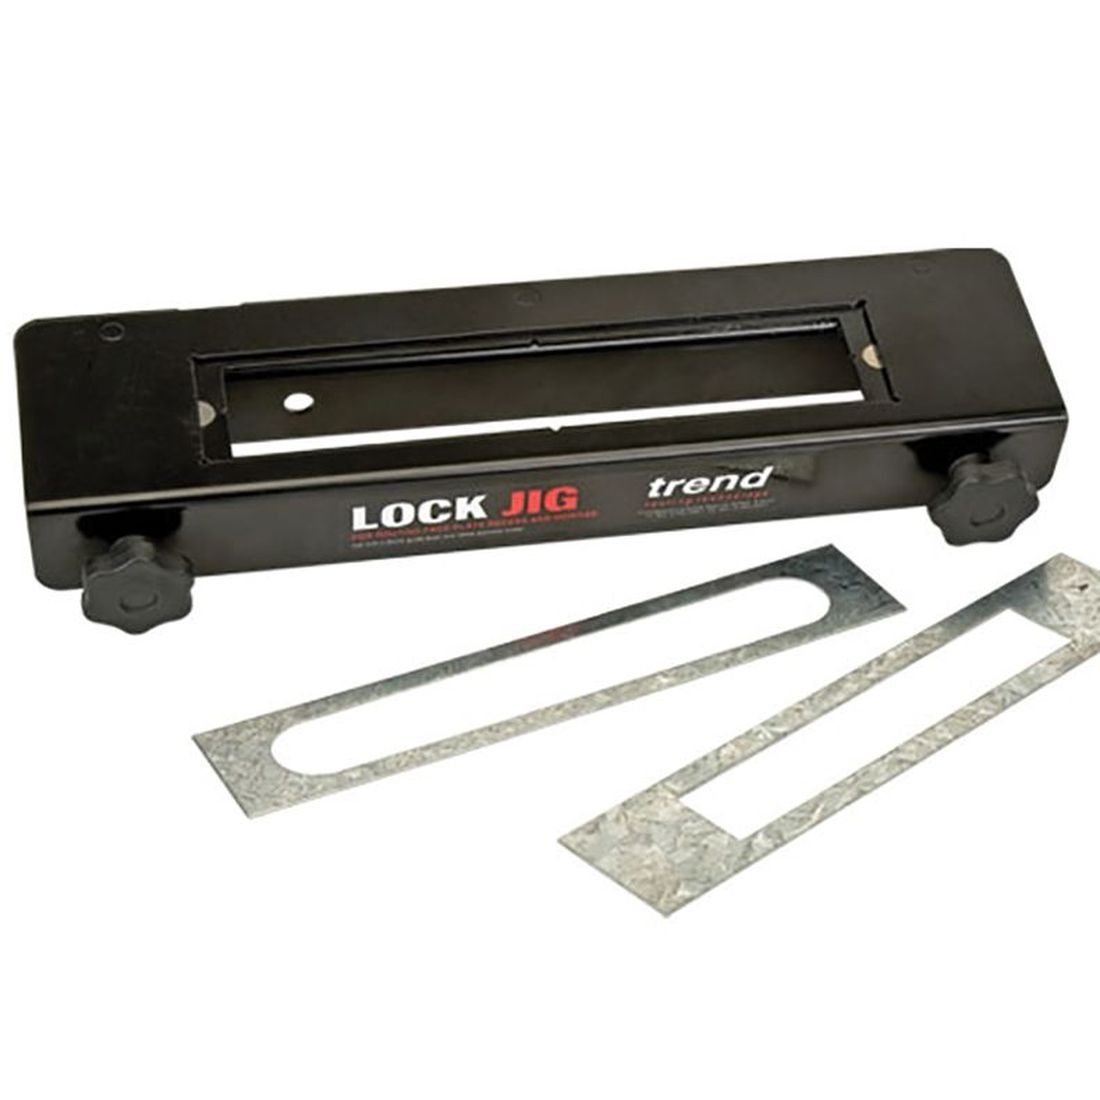 Trend Lock Jig for Router               